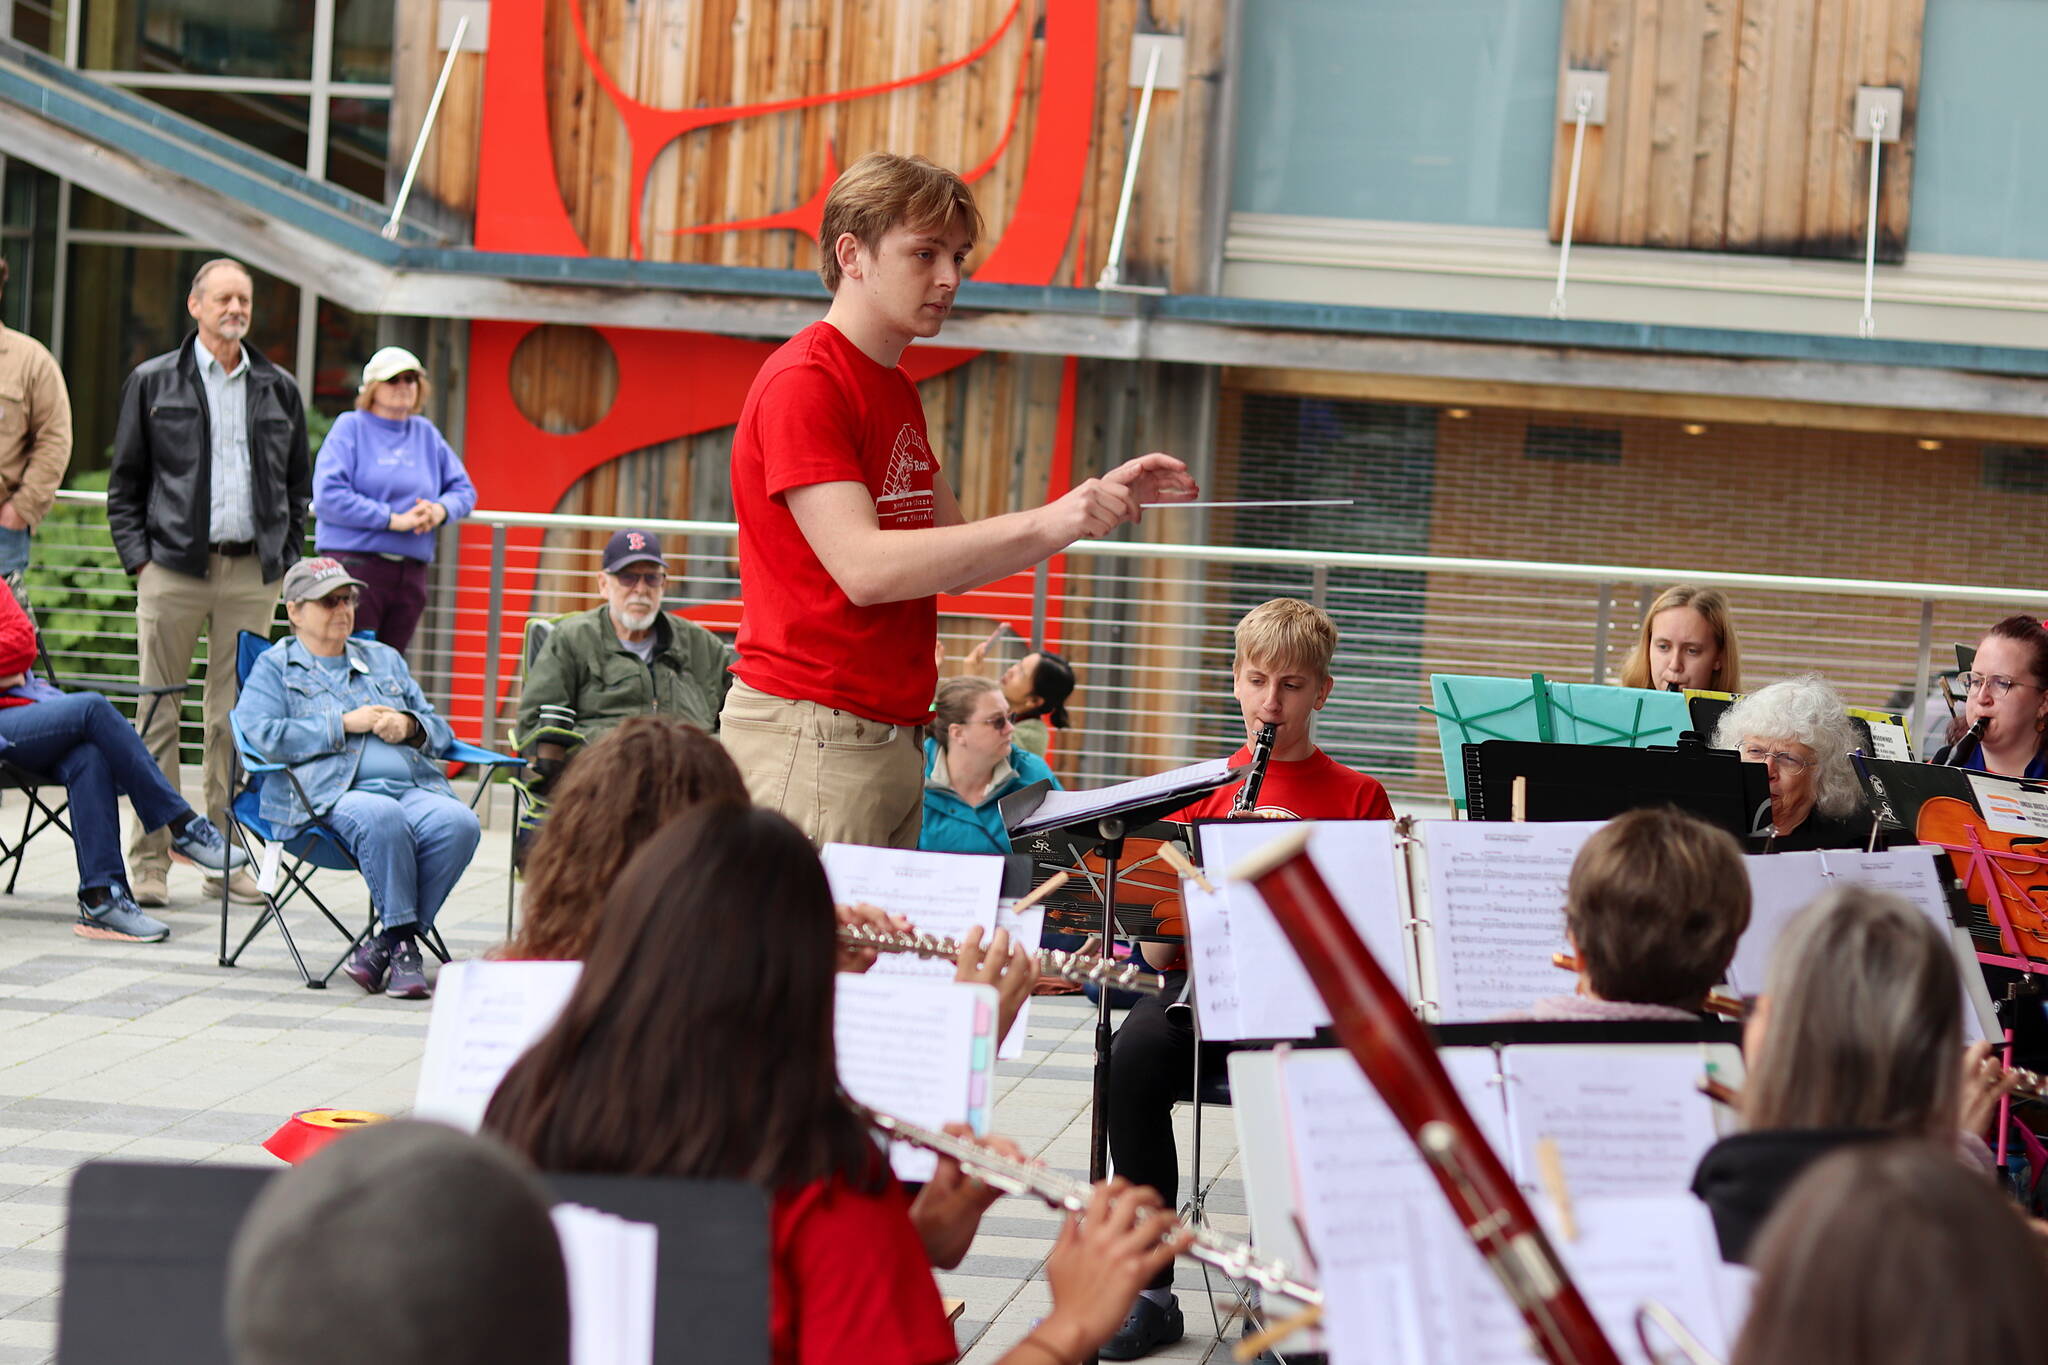 Patrick Jimmerson, a Juneau resident studying music at Loyola University in New Orleans, guest conducts a song by the Juneau Volunteer Marching Band on Sunday at Sealaska Heritage Plaza. (Mark Sabbatini / Juneau Empire)